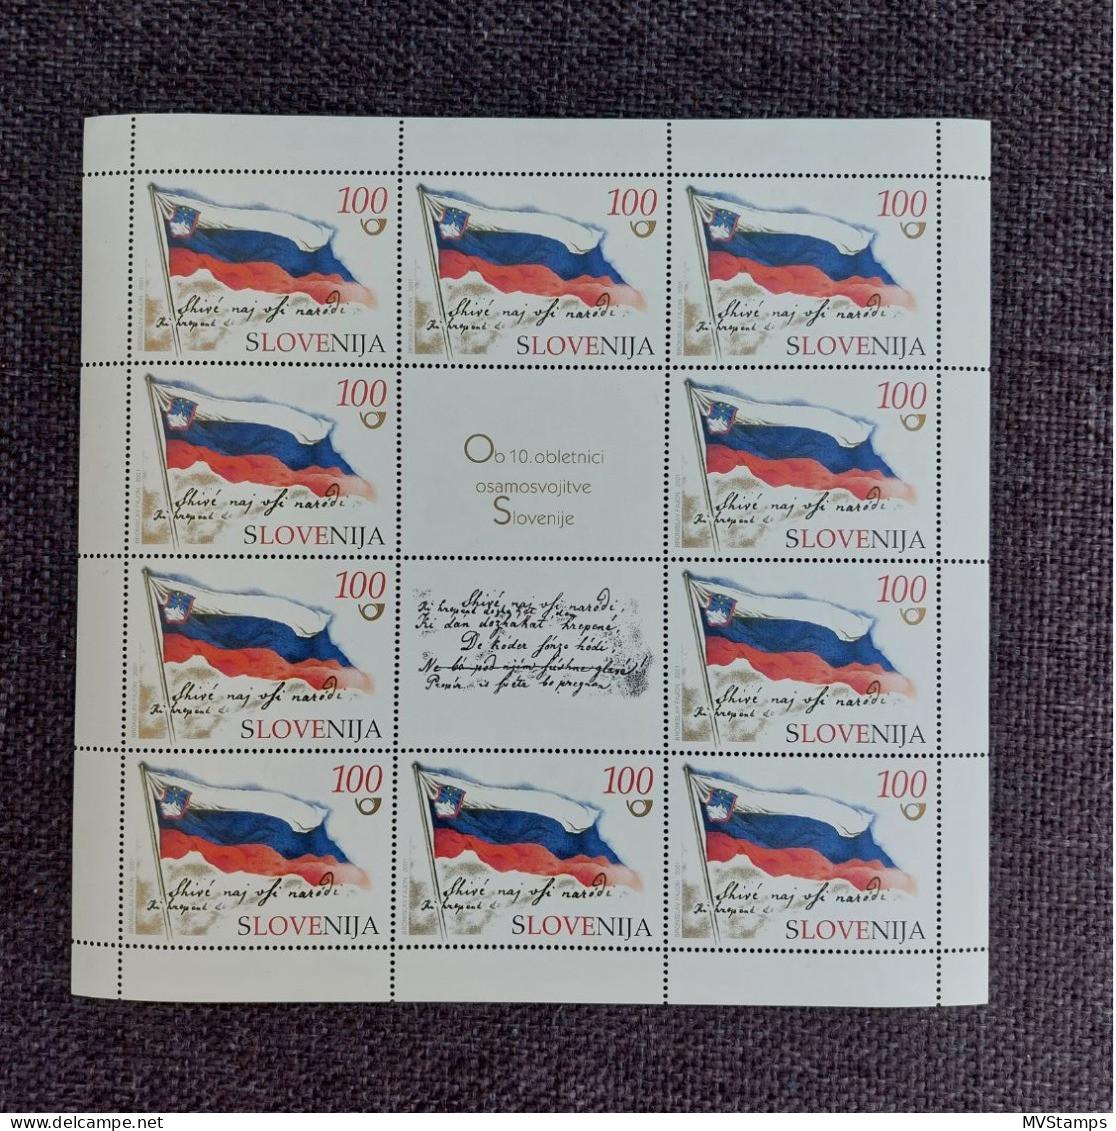 Slovenia 2001 Sheet Flags/Independence Stamps (Michel 355 Klb) MNH - Slowenien